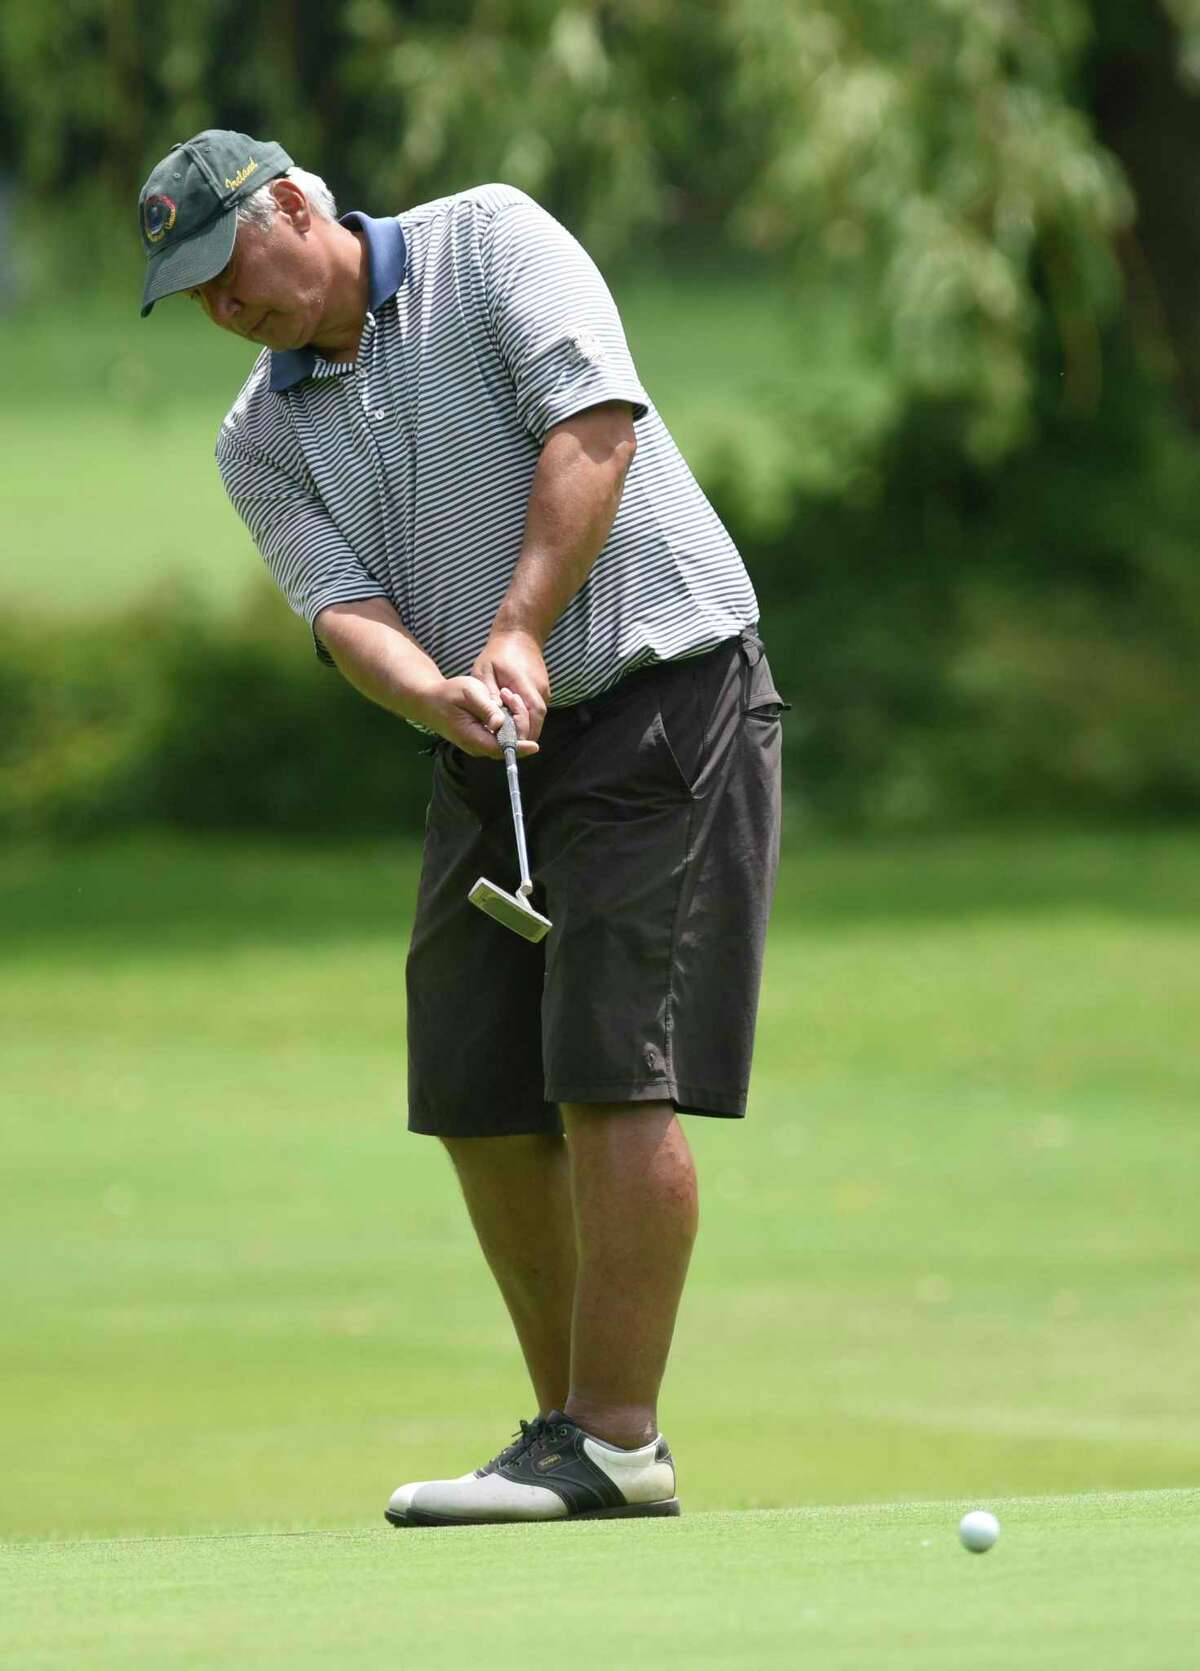 John Byrne putts in the 76th Annual Town Wide Men's Golf Tournament at Griffith E. Harris Golf Course in Greenwich, Conn. Sunday, June 27, 2021.